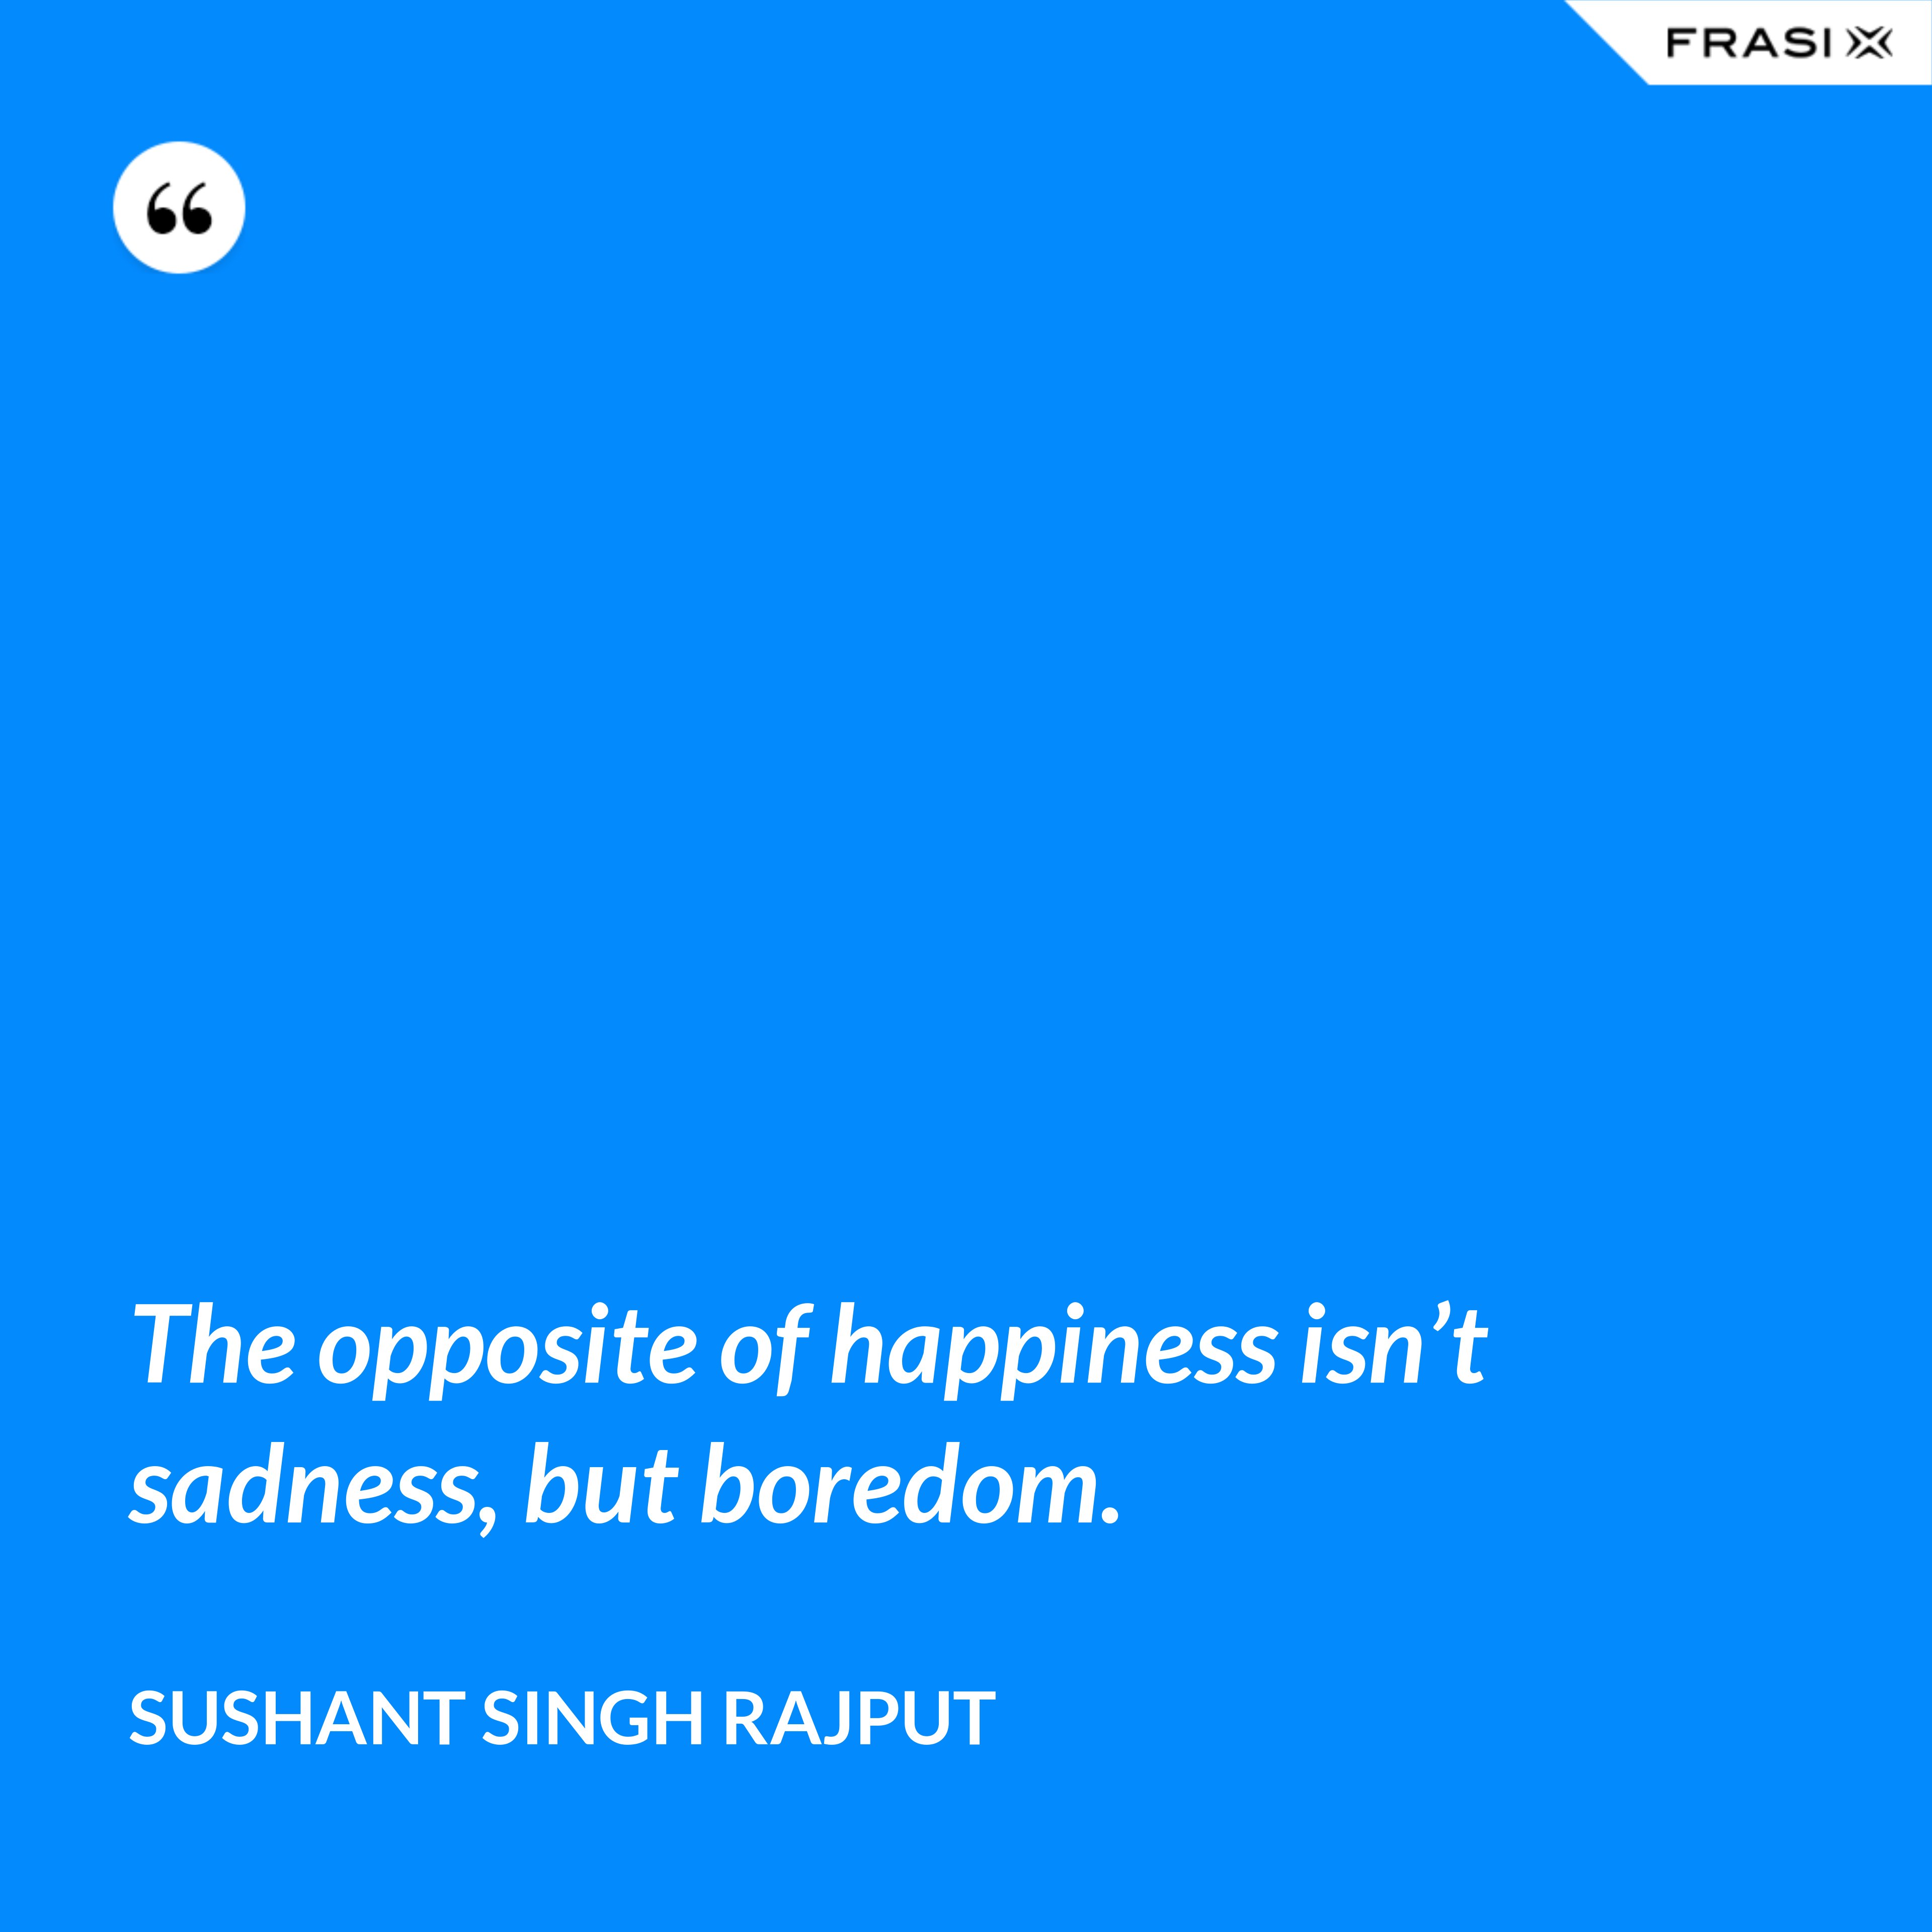 The opposite of happiness isn’t sadness, but boredom. - Sushant Singh Rajput